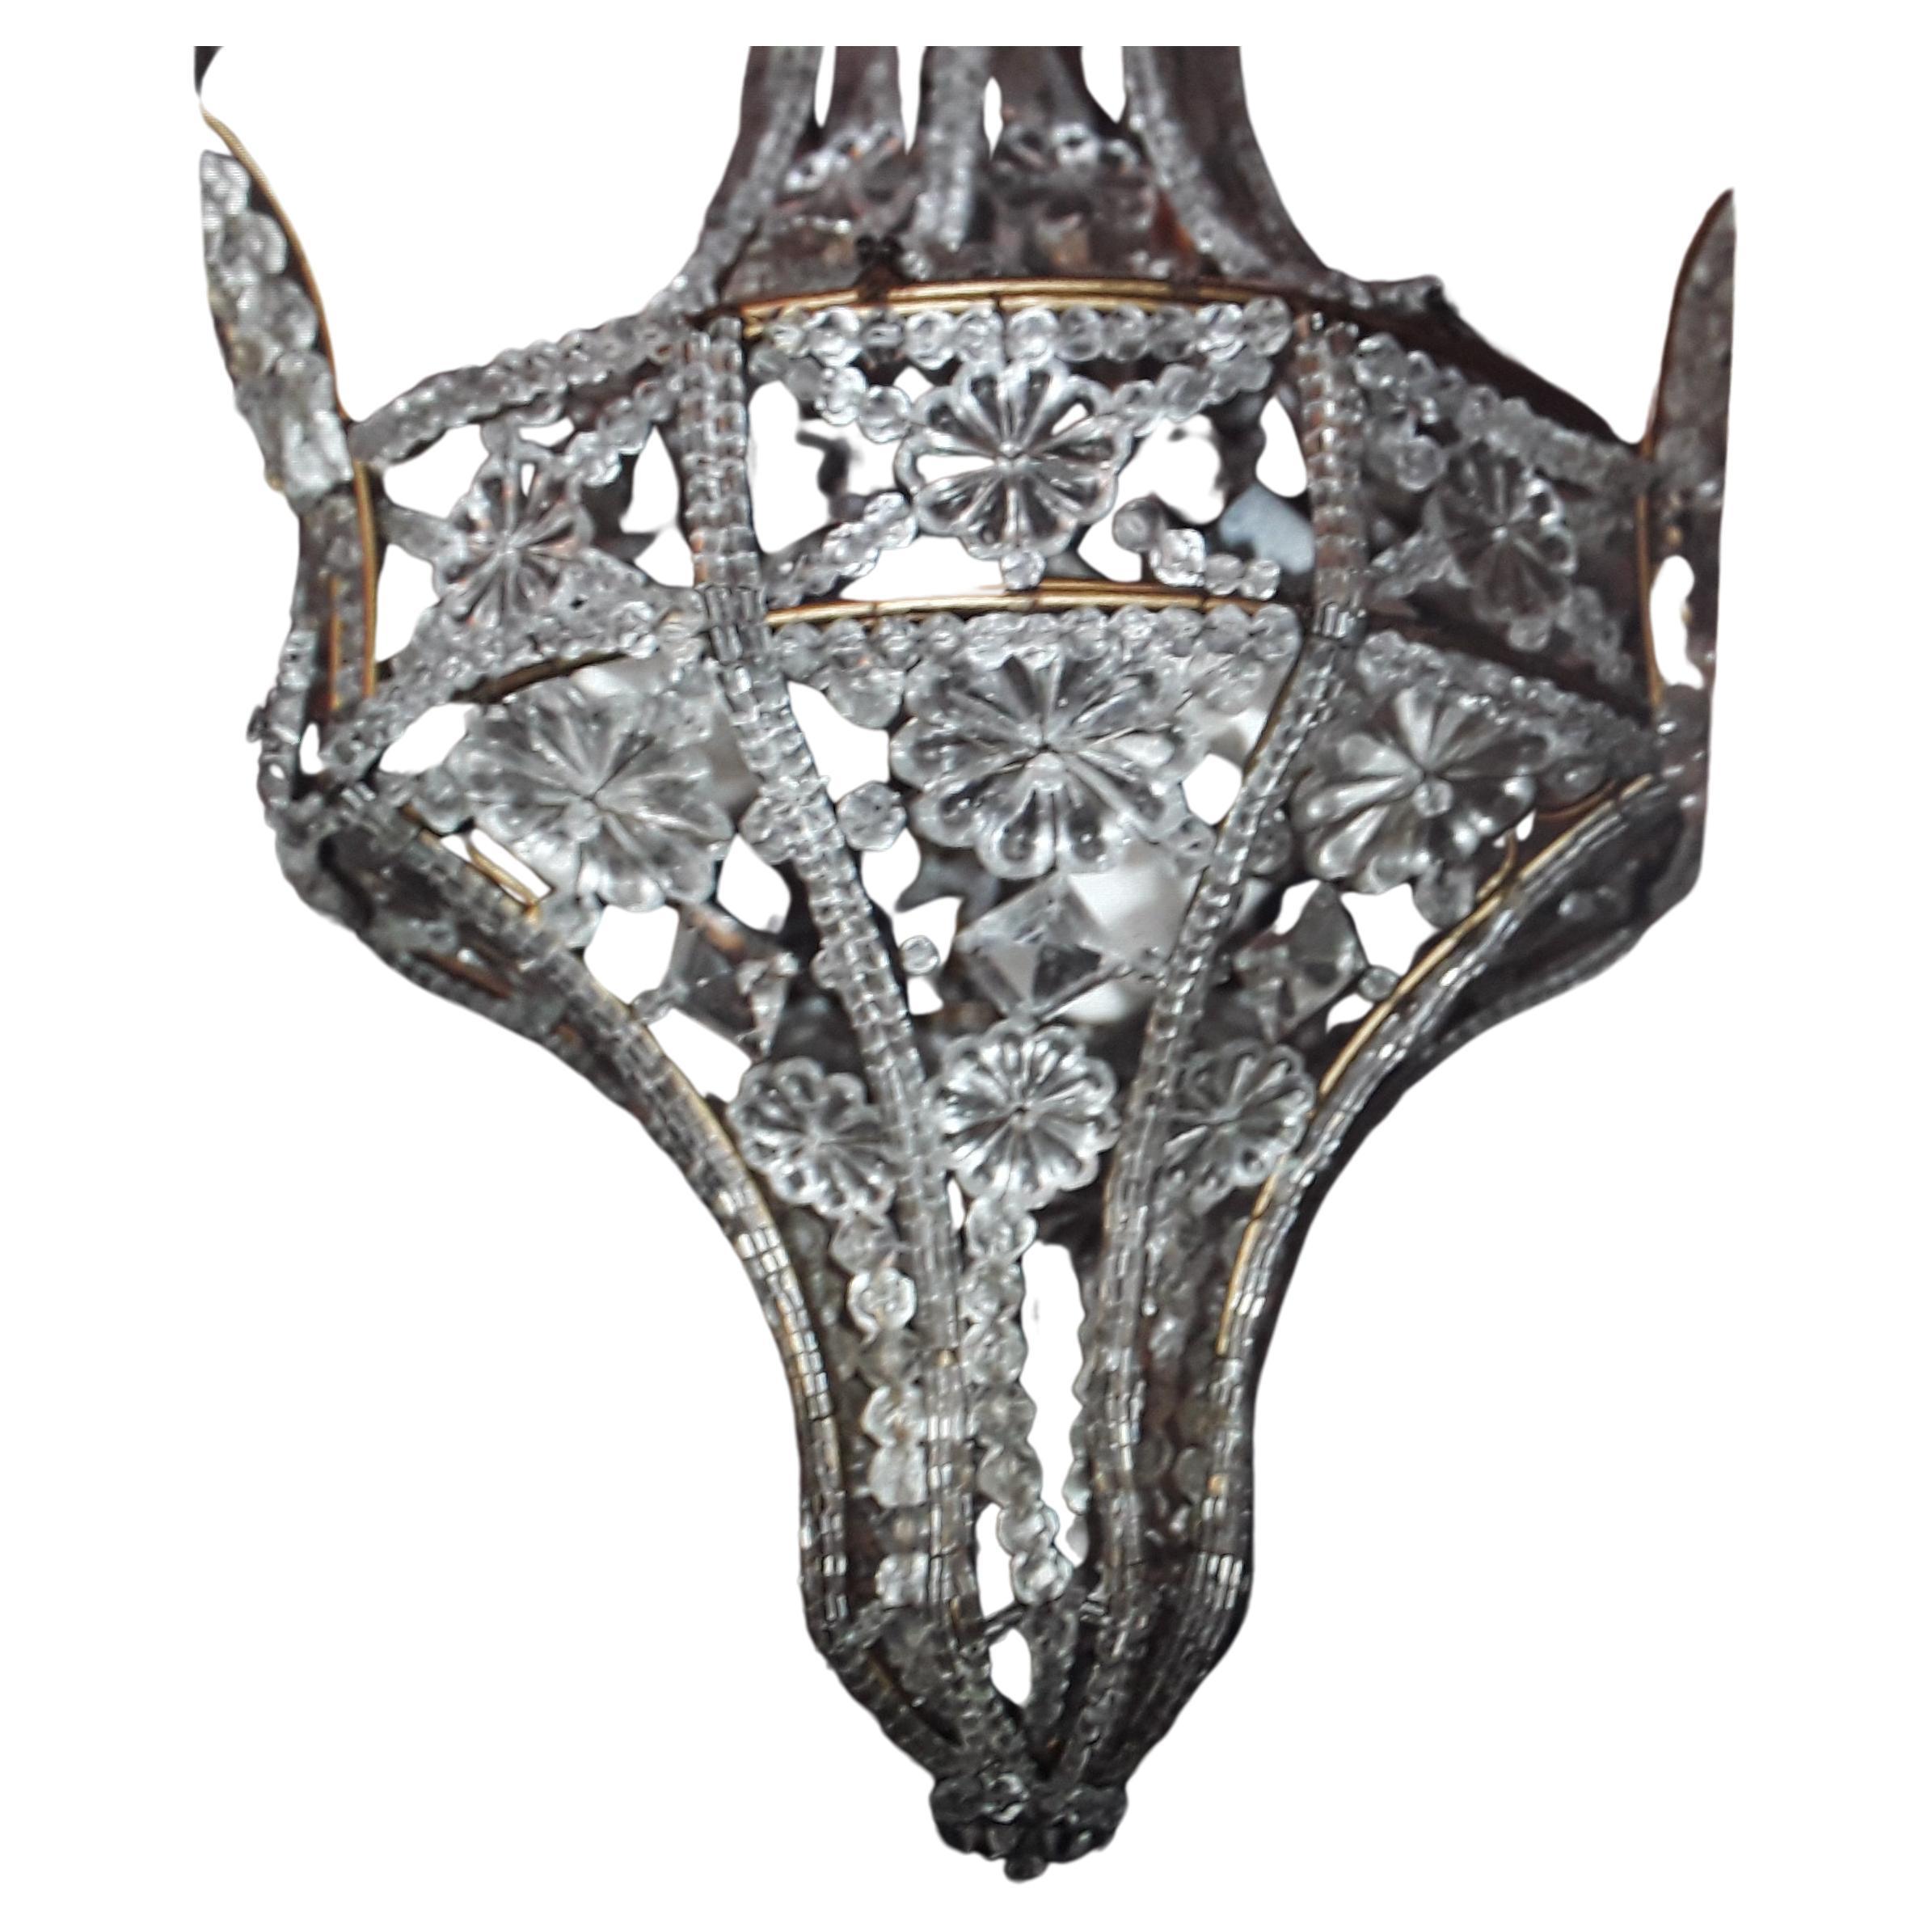 c1940's French Hollywood Regency Beaded Cut Crystal Hanging Lantern, Ceiling Pendant Fixture. This is a very high quality piece attributed to Maison Bagues. Most lanterns of this type have a single light this one has 3.